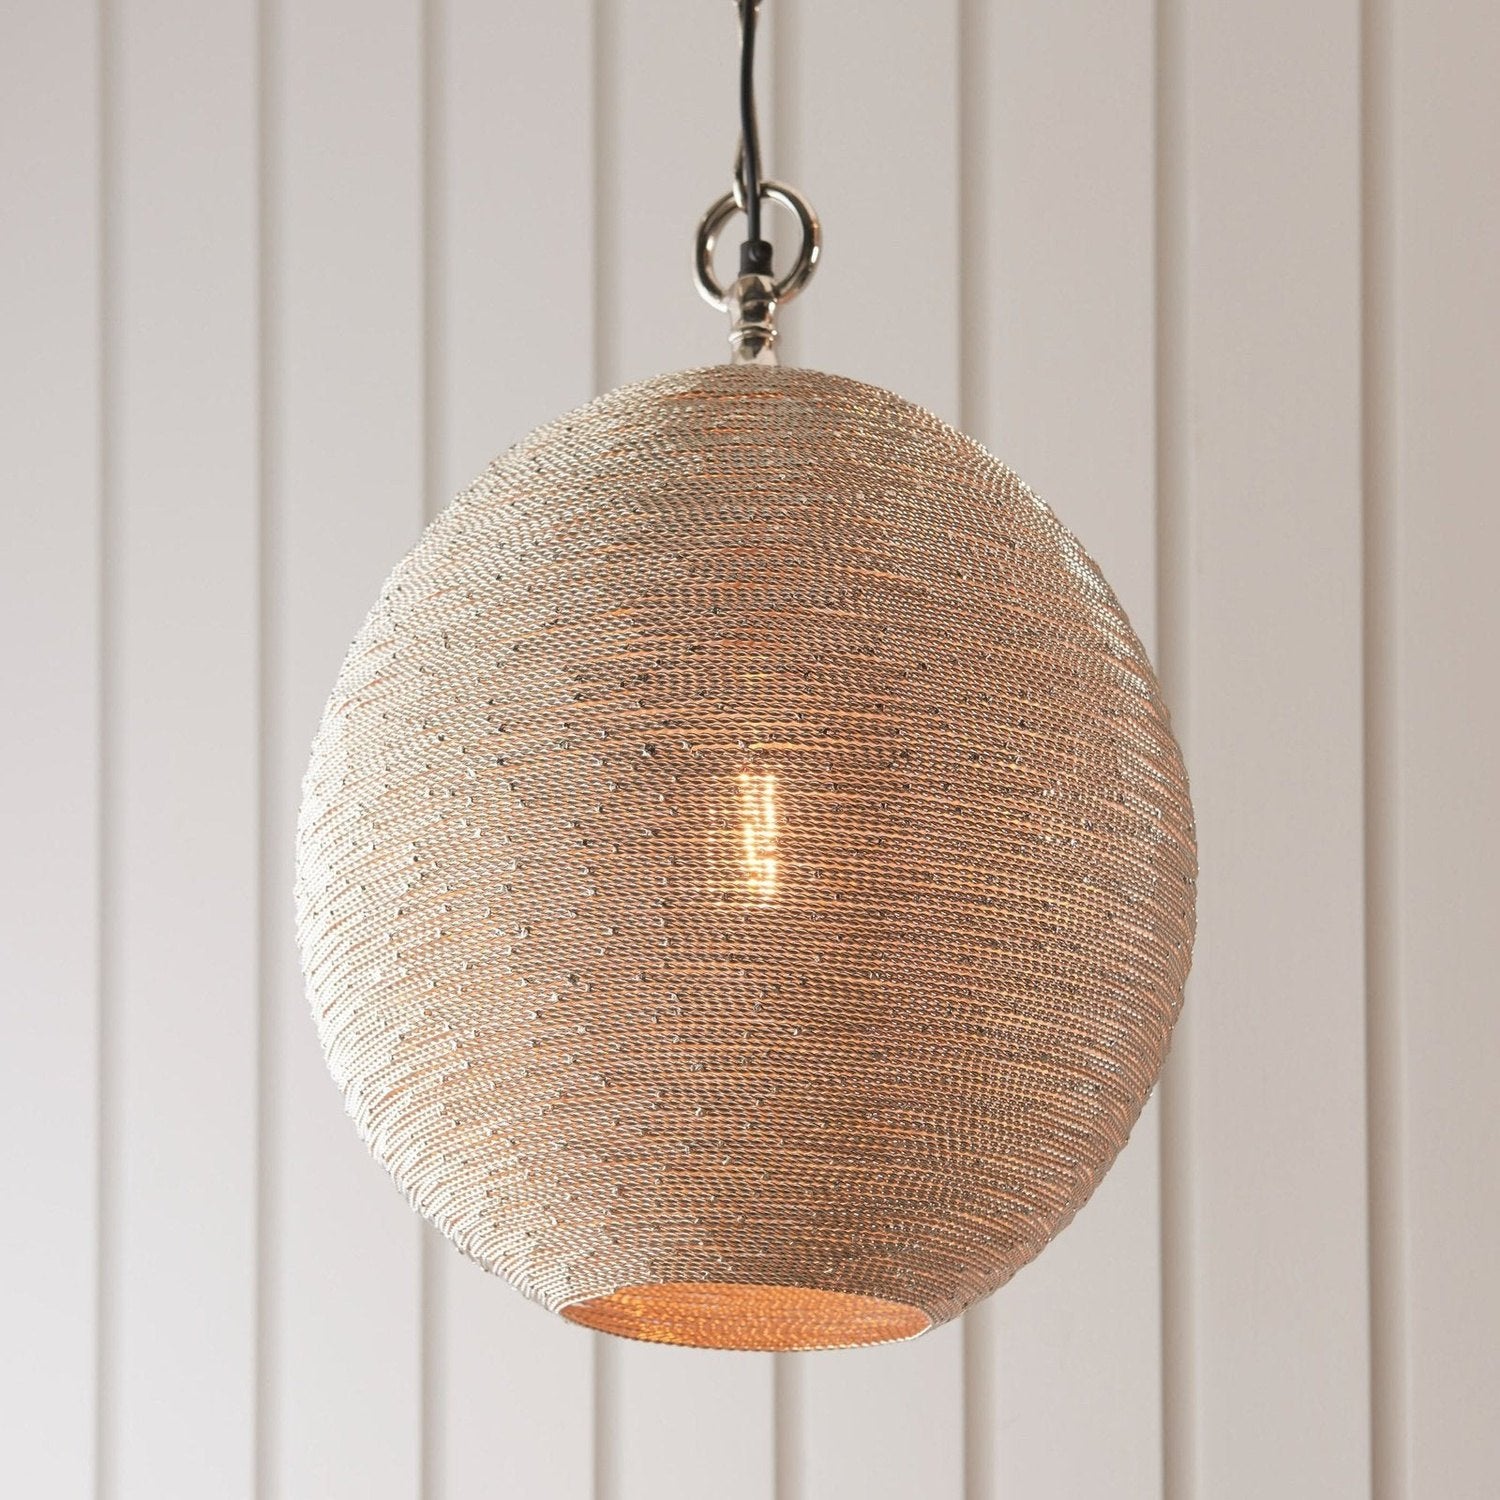 Handmade Indian Wire Pendant Light - Diffused Light Effect